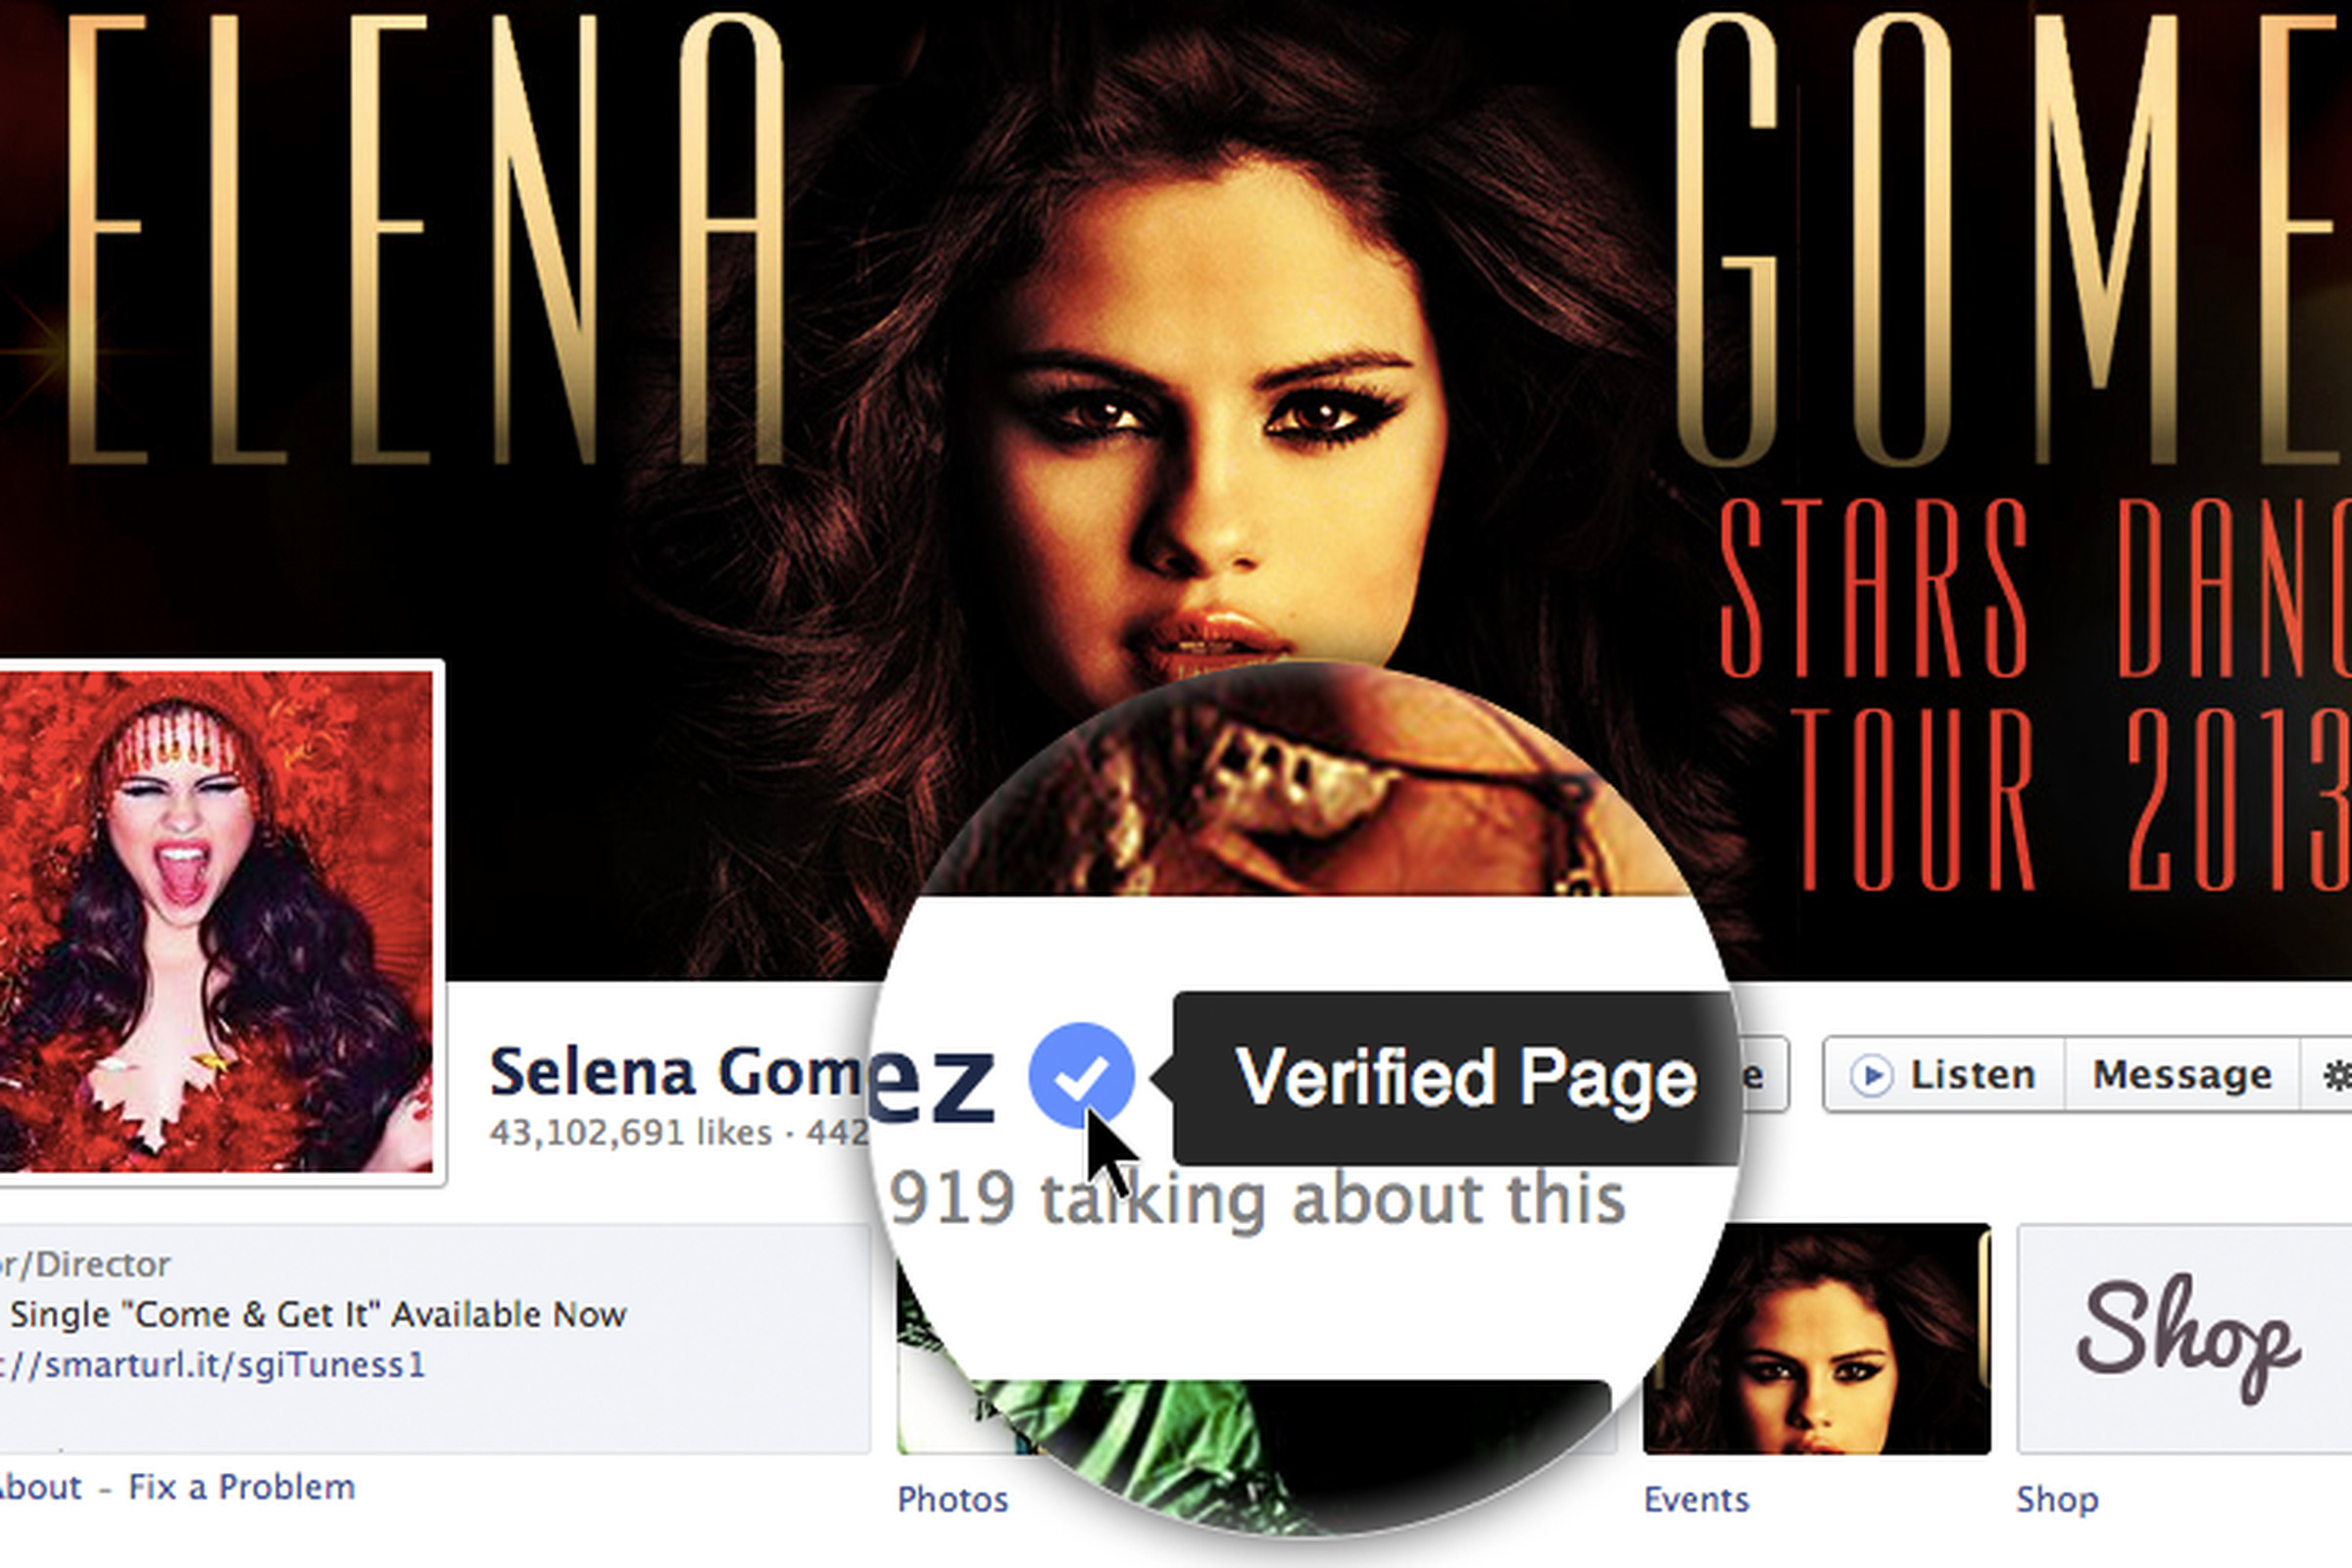 Verified Pages and Profiles in Facebook